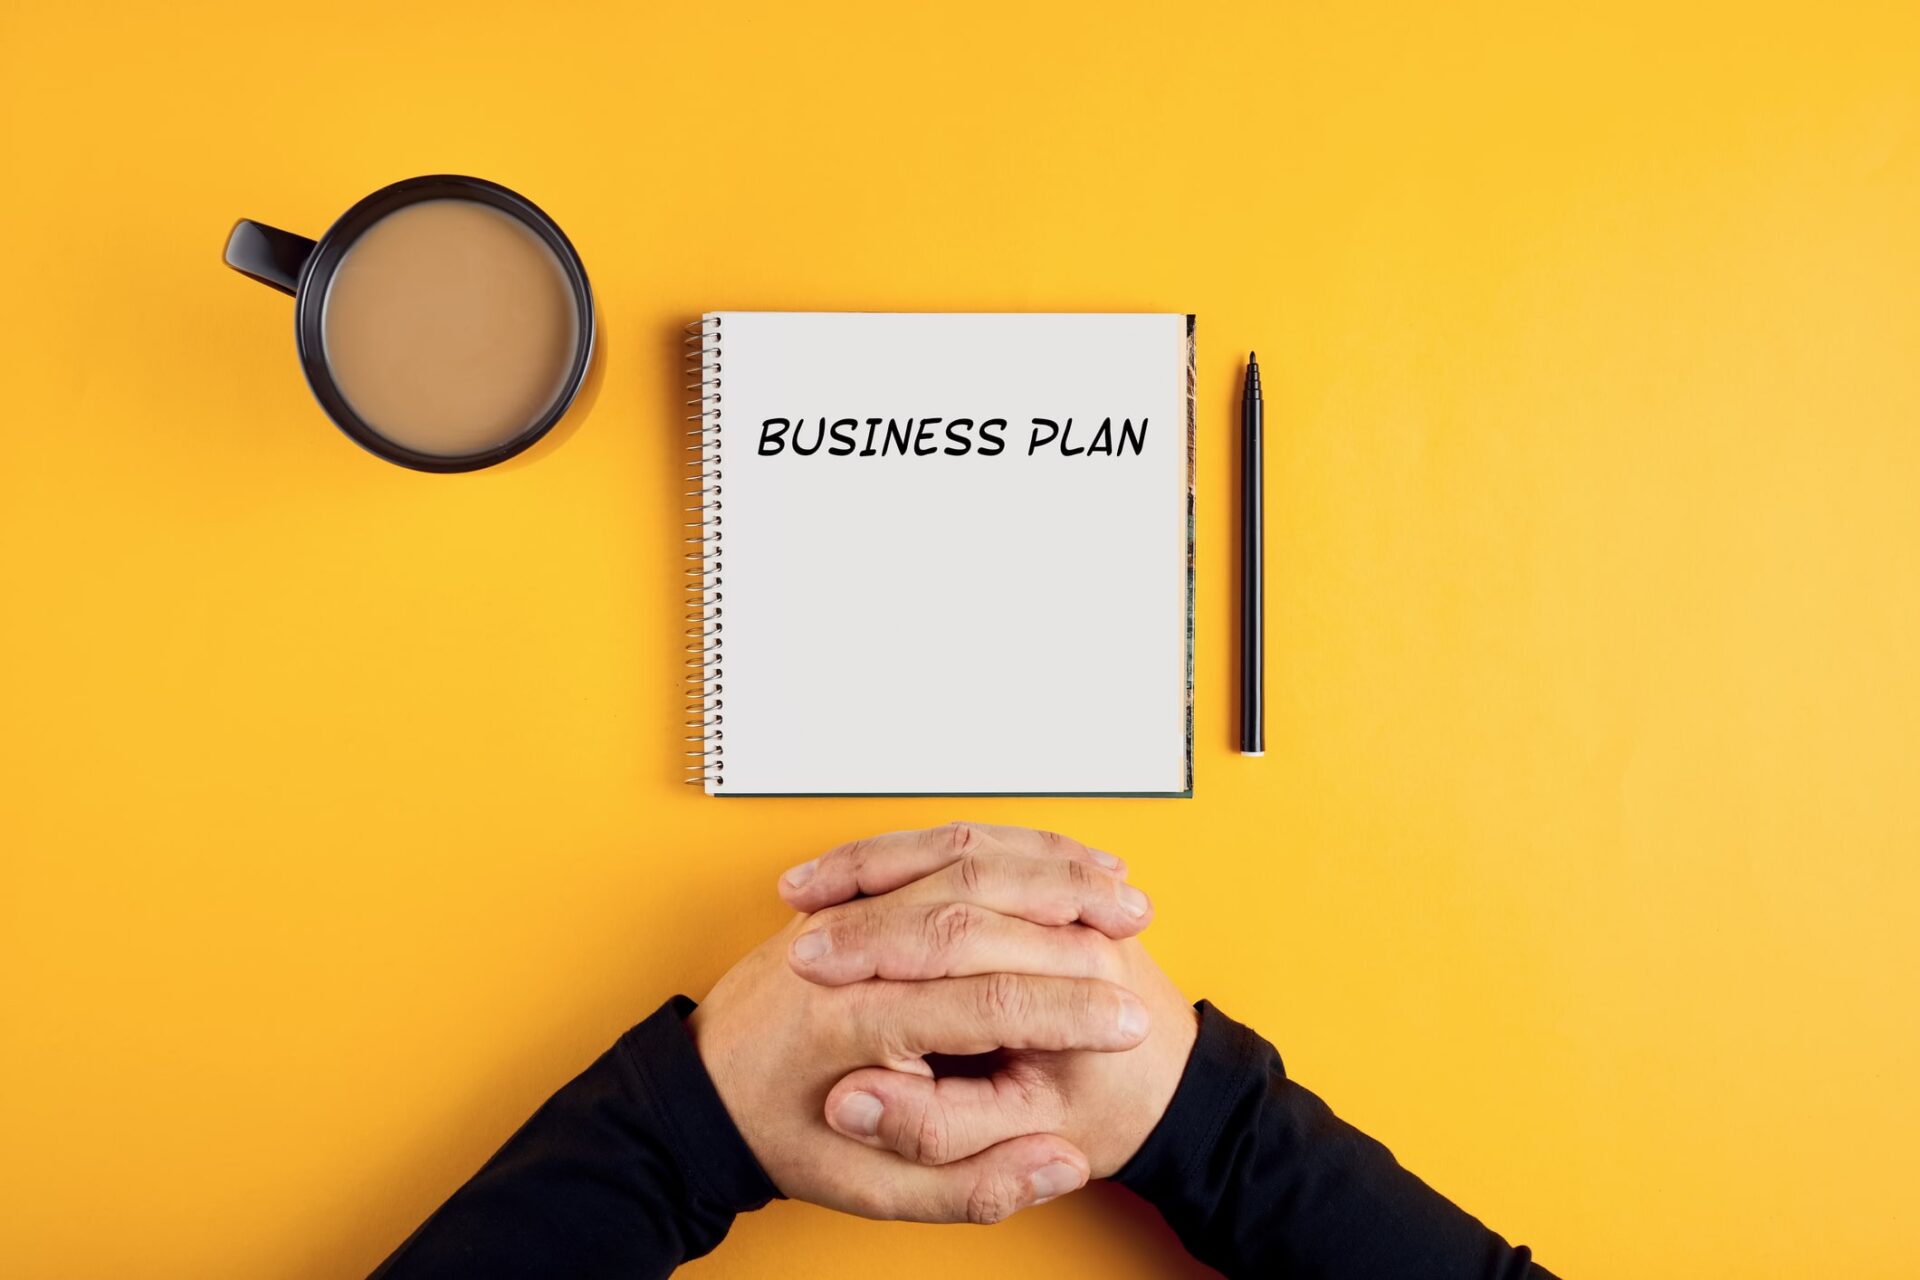 How to Create a Business Plan: A Step-by-Step Guide